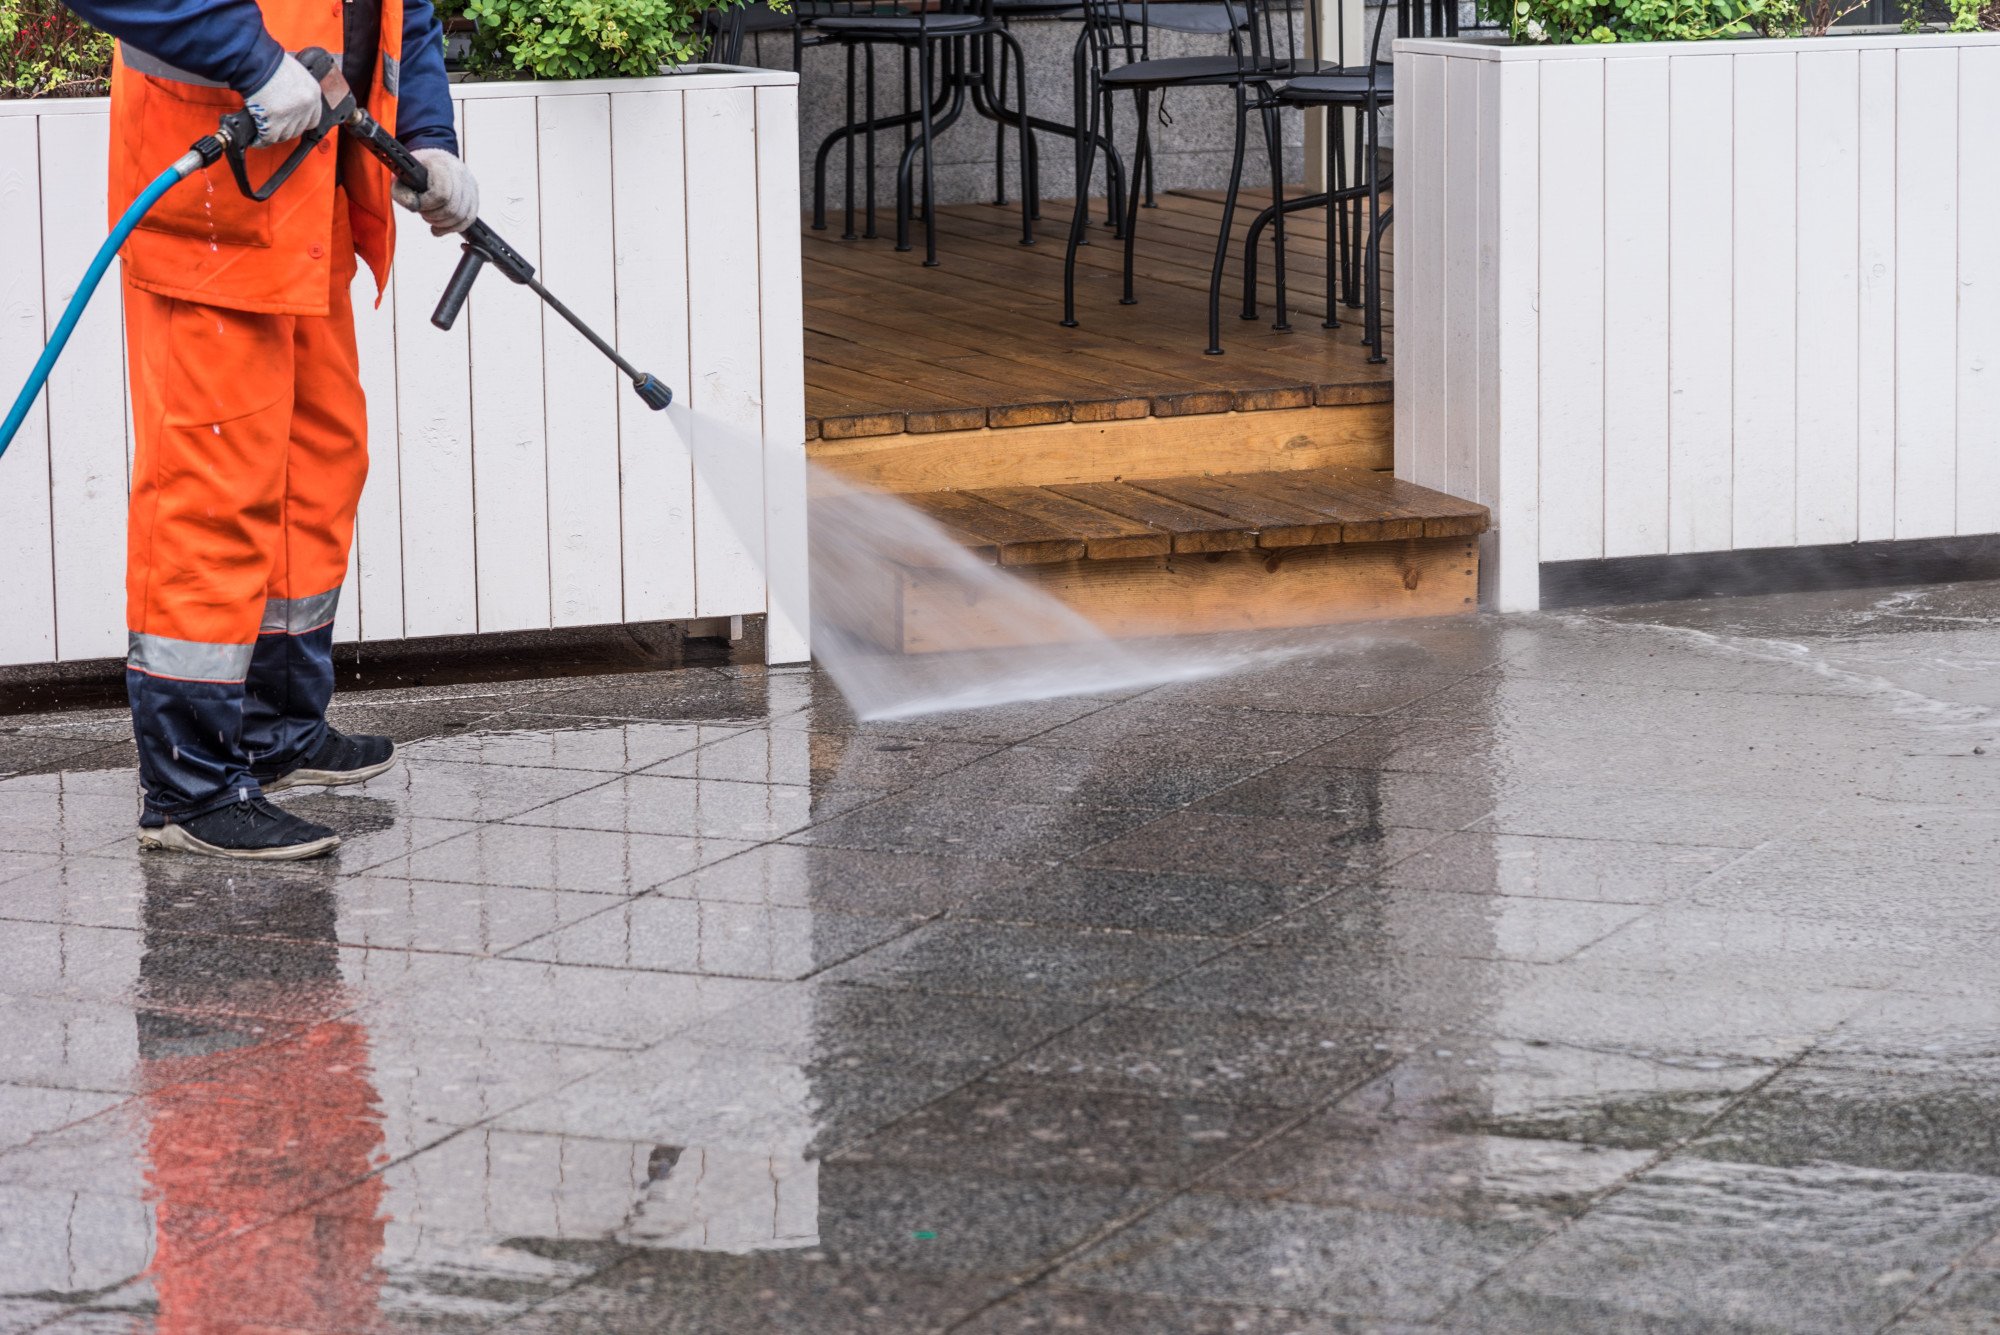 Discover the key differences between residential and commercial cleaning services. Learn how to choose the right cleaning solution for your specific needs.